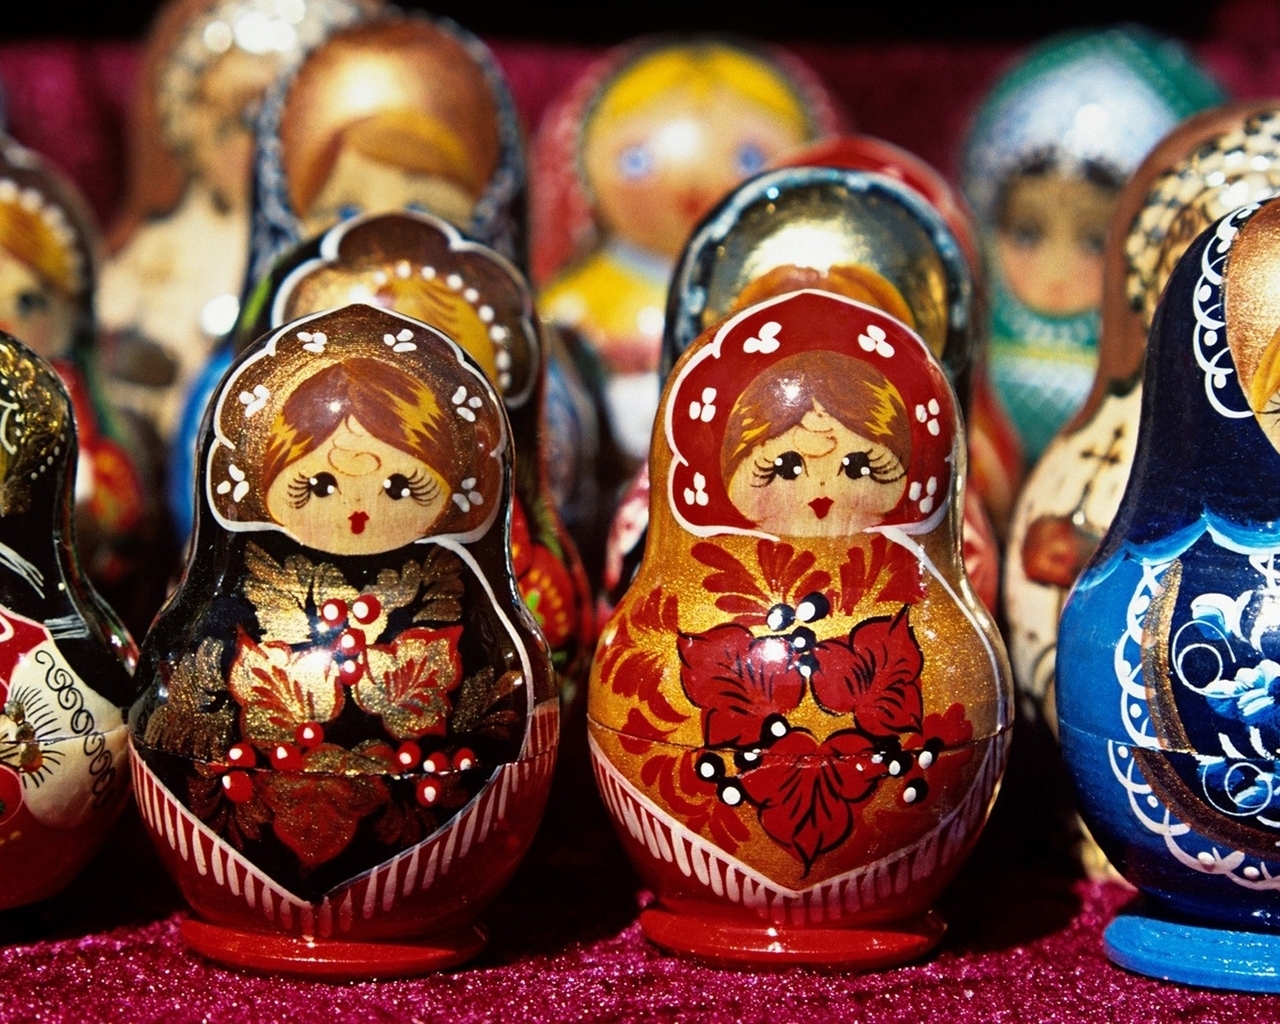 Russian Dolls for 1280 x 1024 resolution